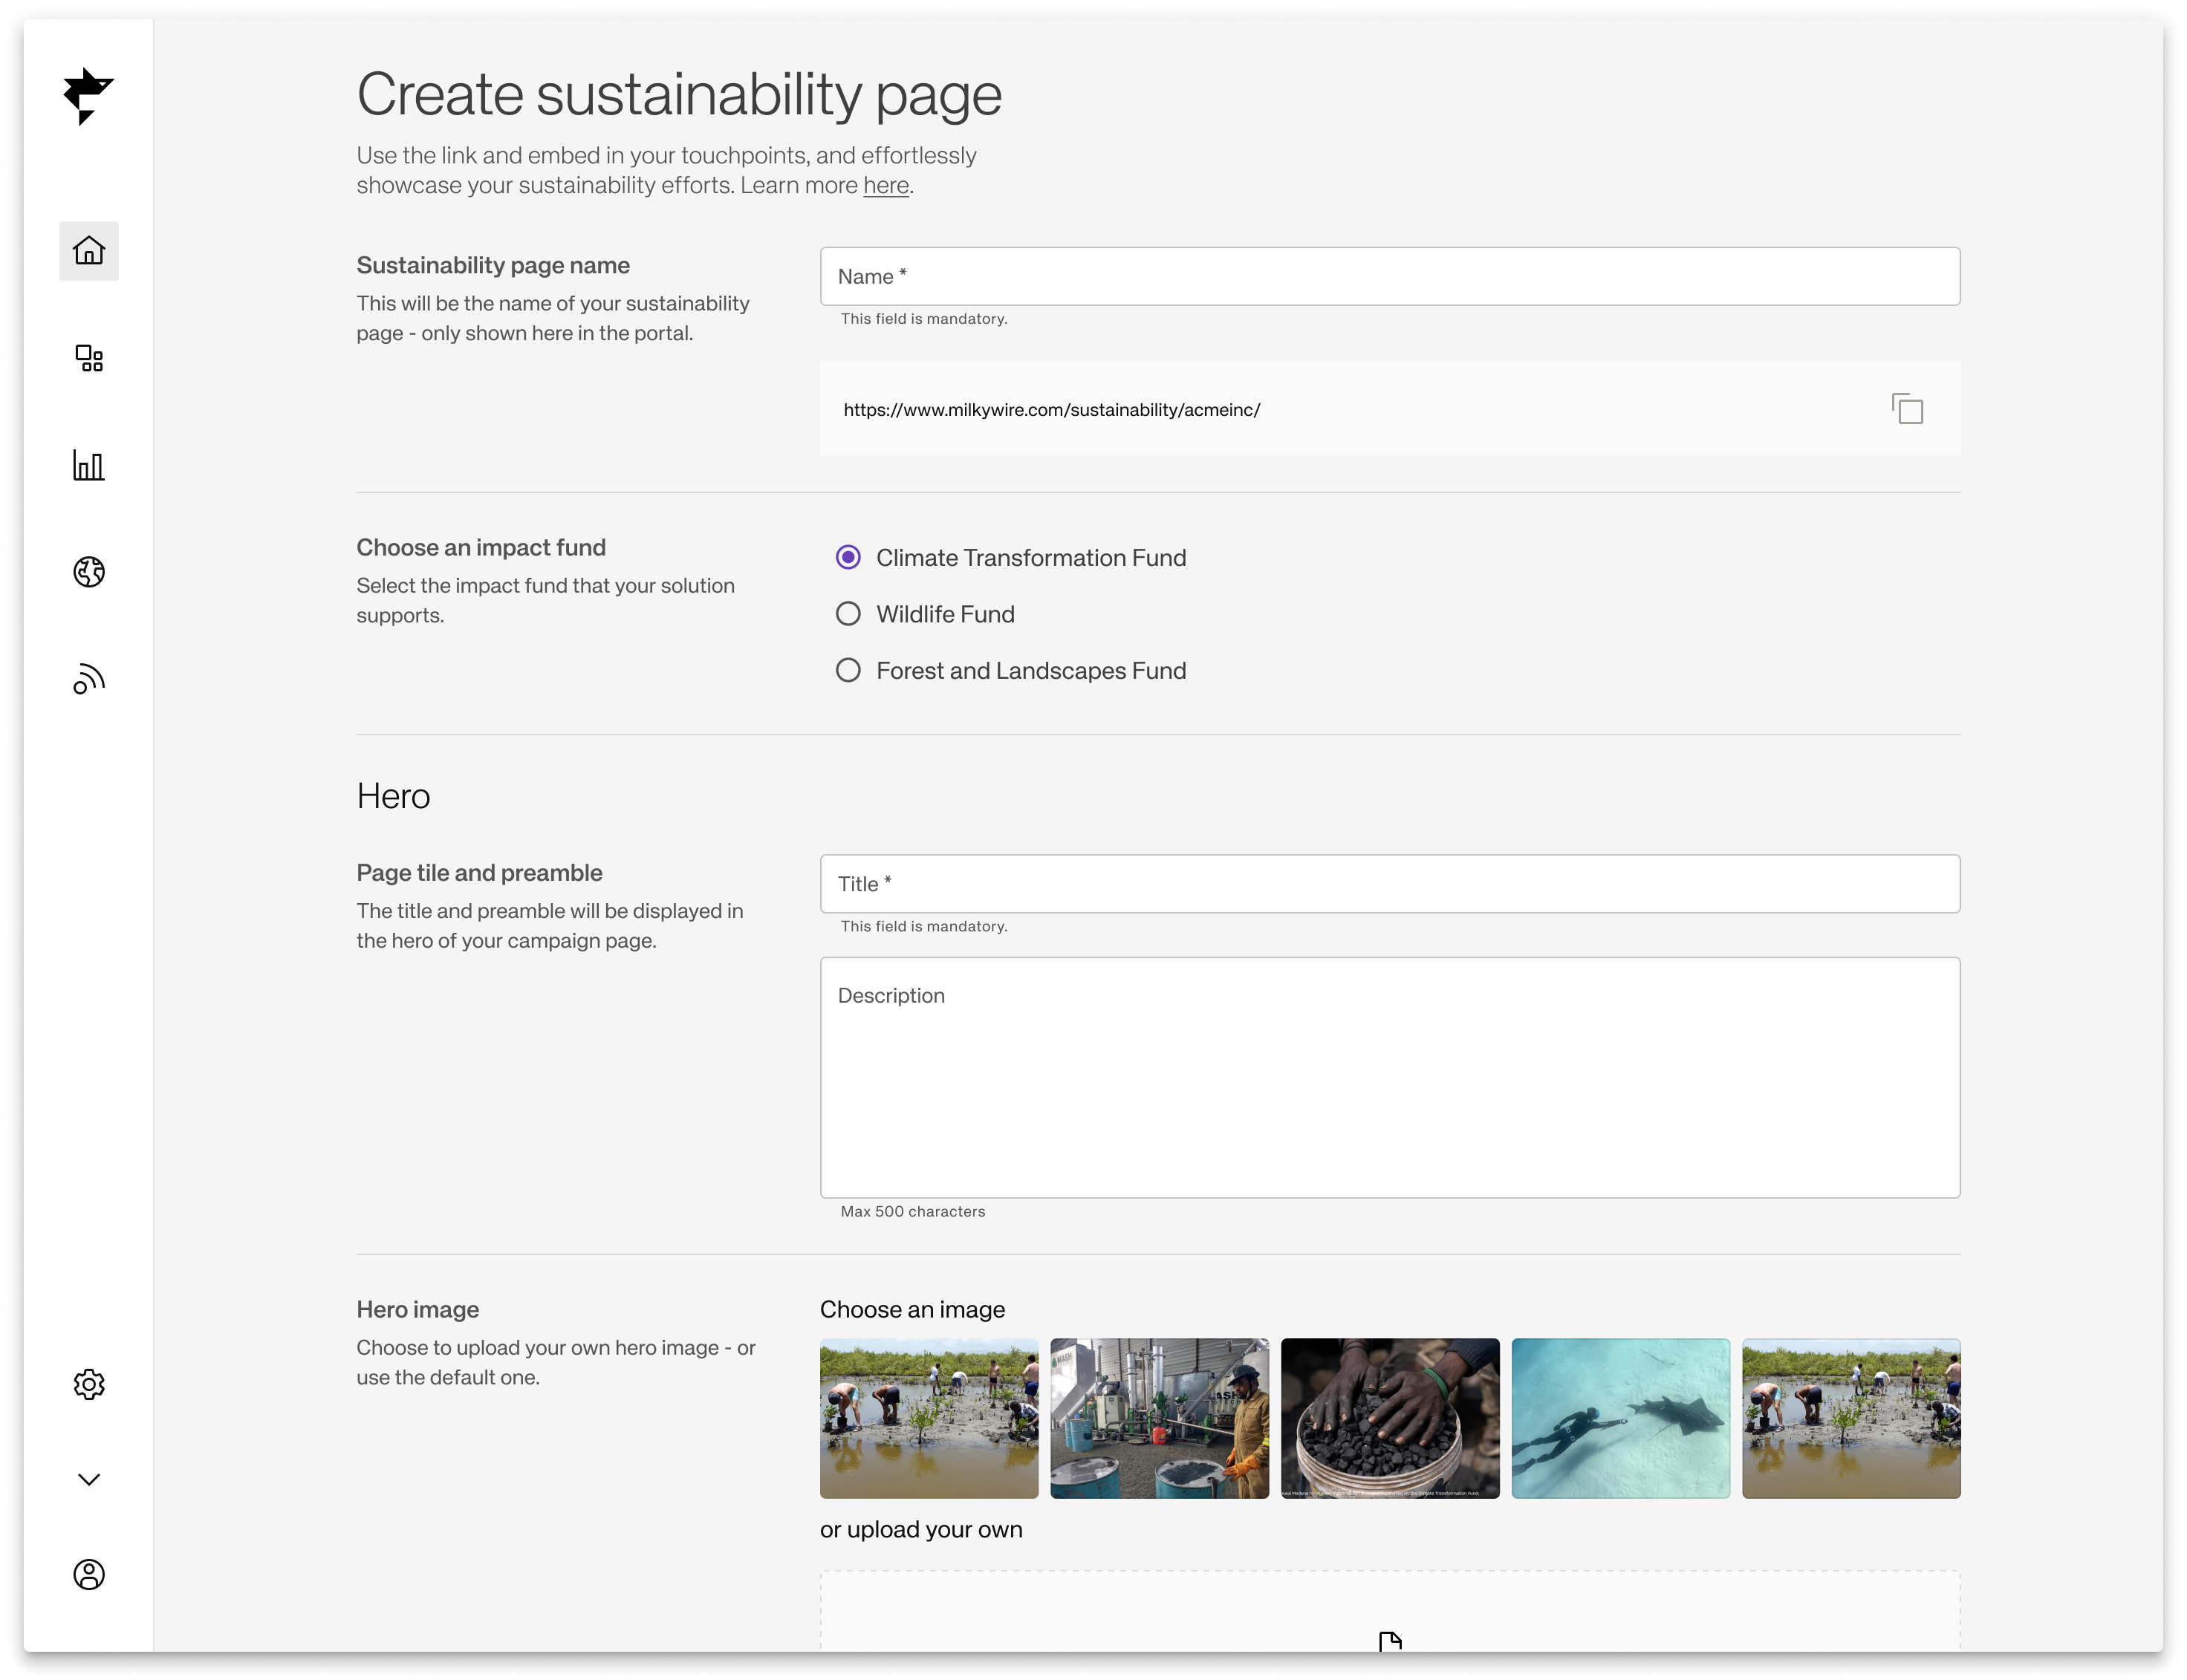 Create Sustainability page